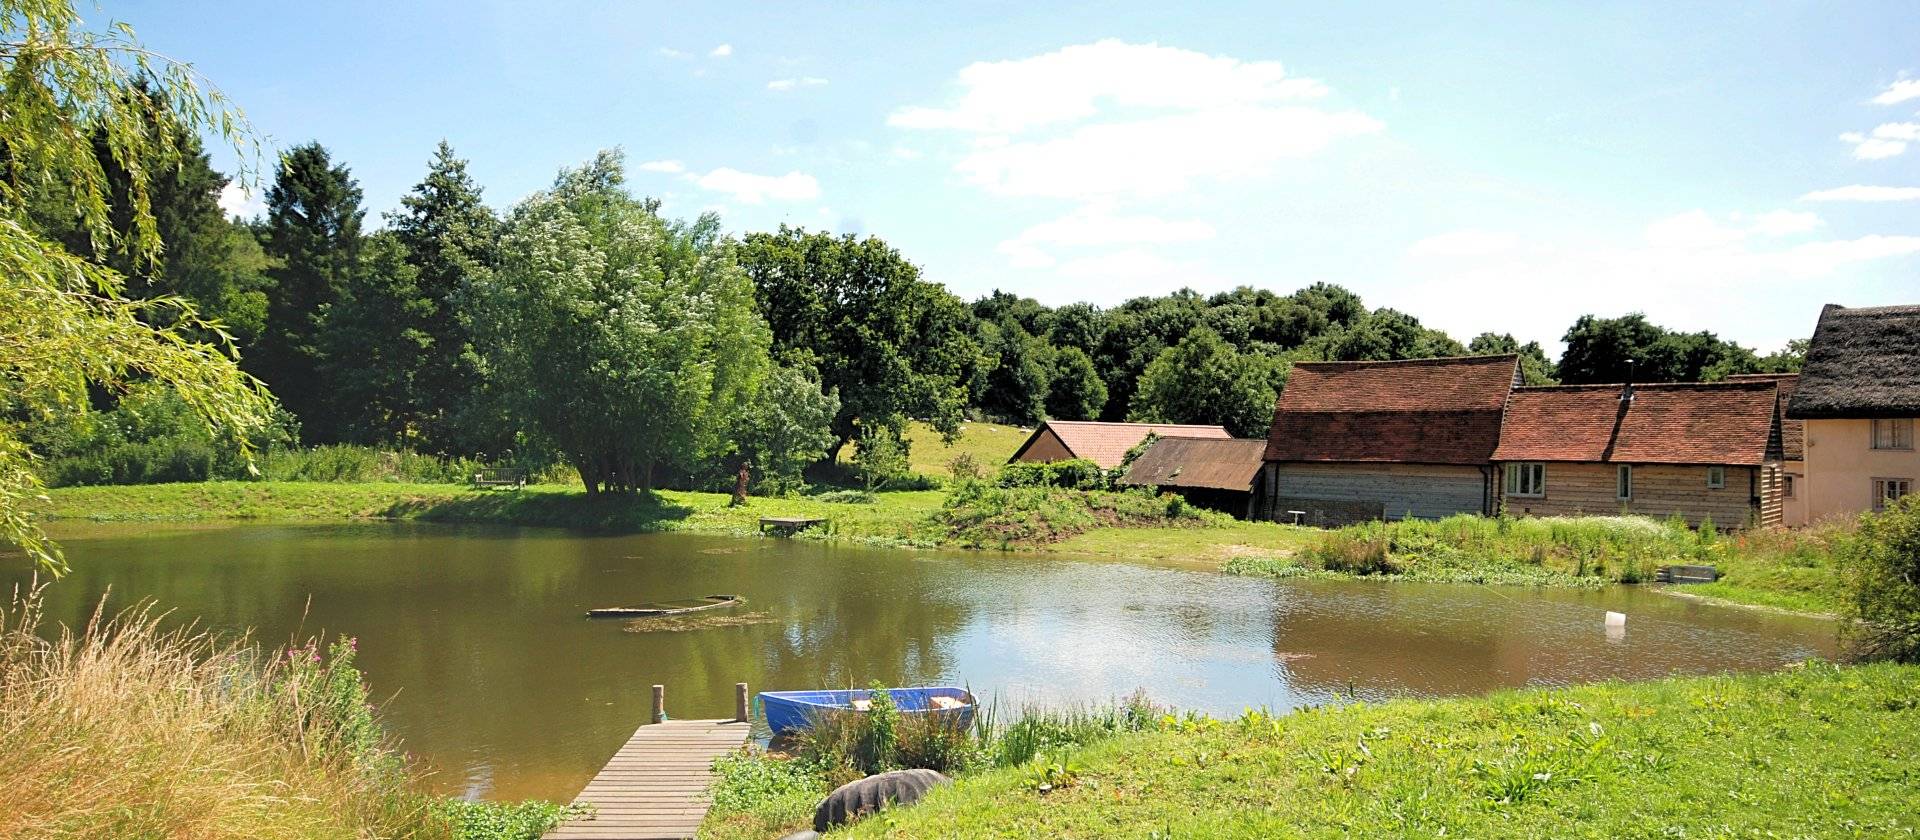 Home - Holiday Cottages In Suffolk